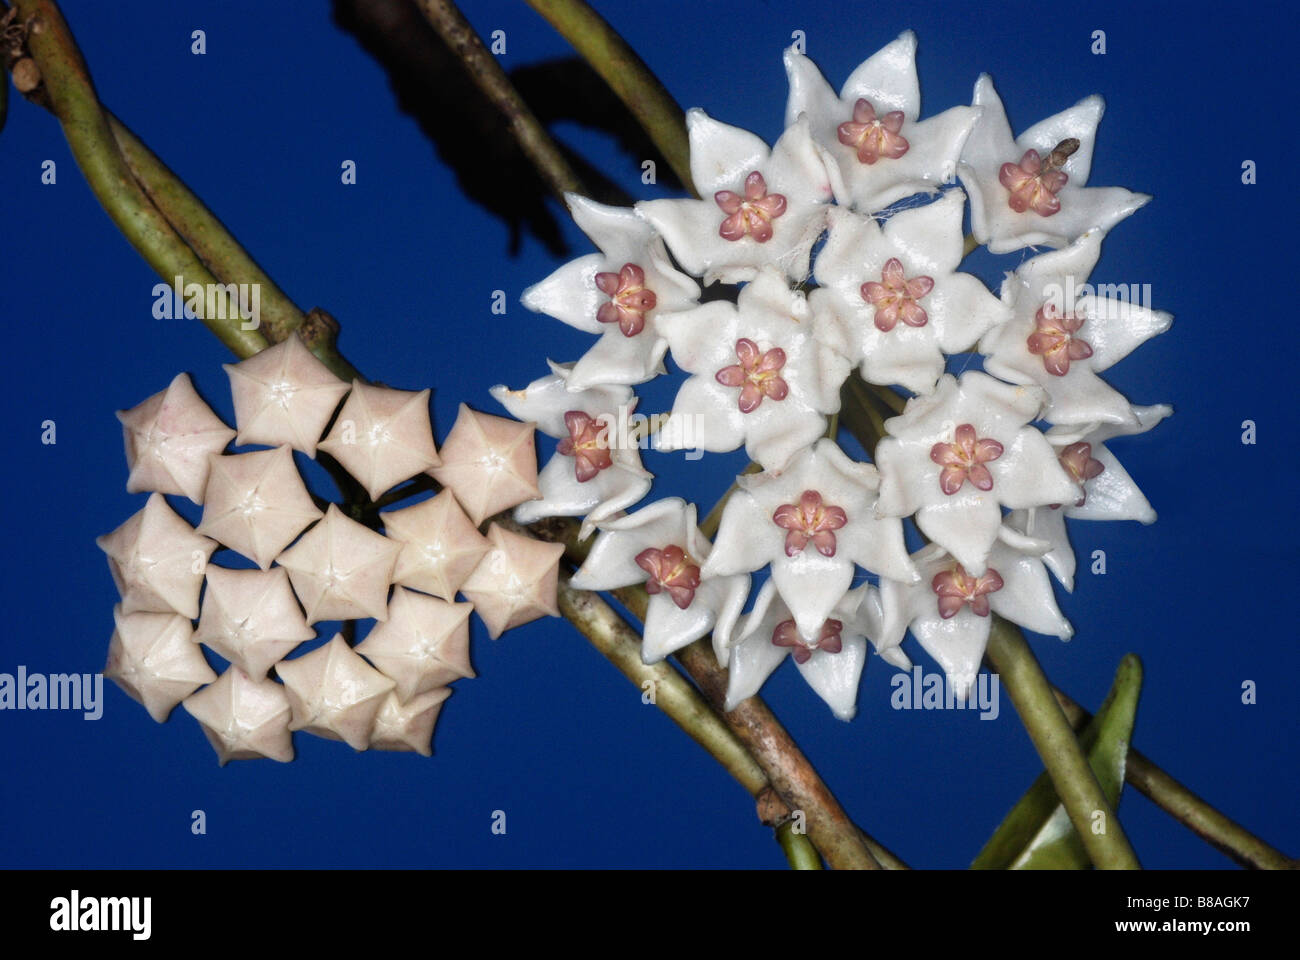 Flowers of an epiphytic climber from the Western Ghats called Hoya wightiana. Stock Photo